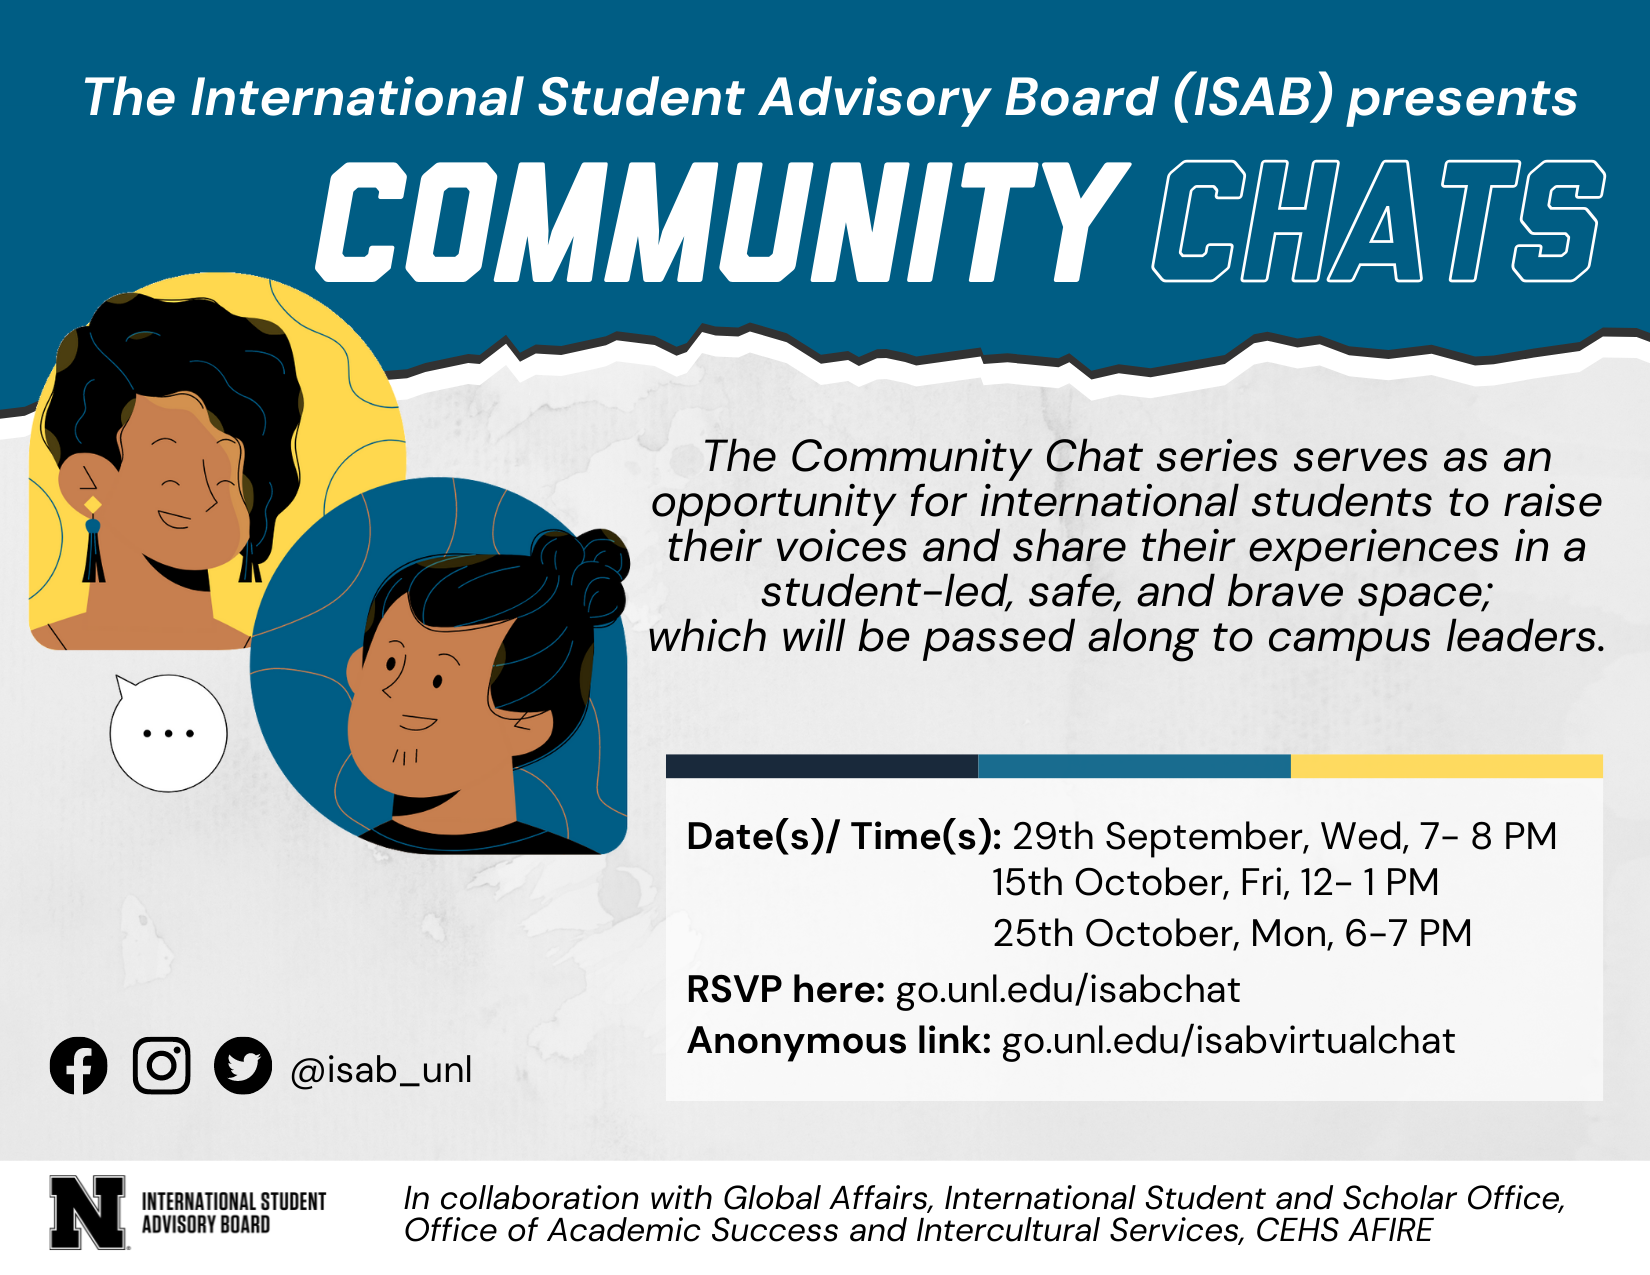 Community Chat series serves as an opportunity for international student to raise their voices and share their experiences in a student-led, safe, and brave space; which will be passed along to campus leaders. The series is on the 29th September, 15th Oct